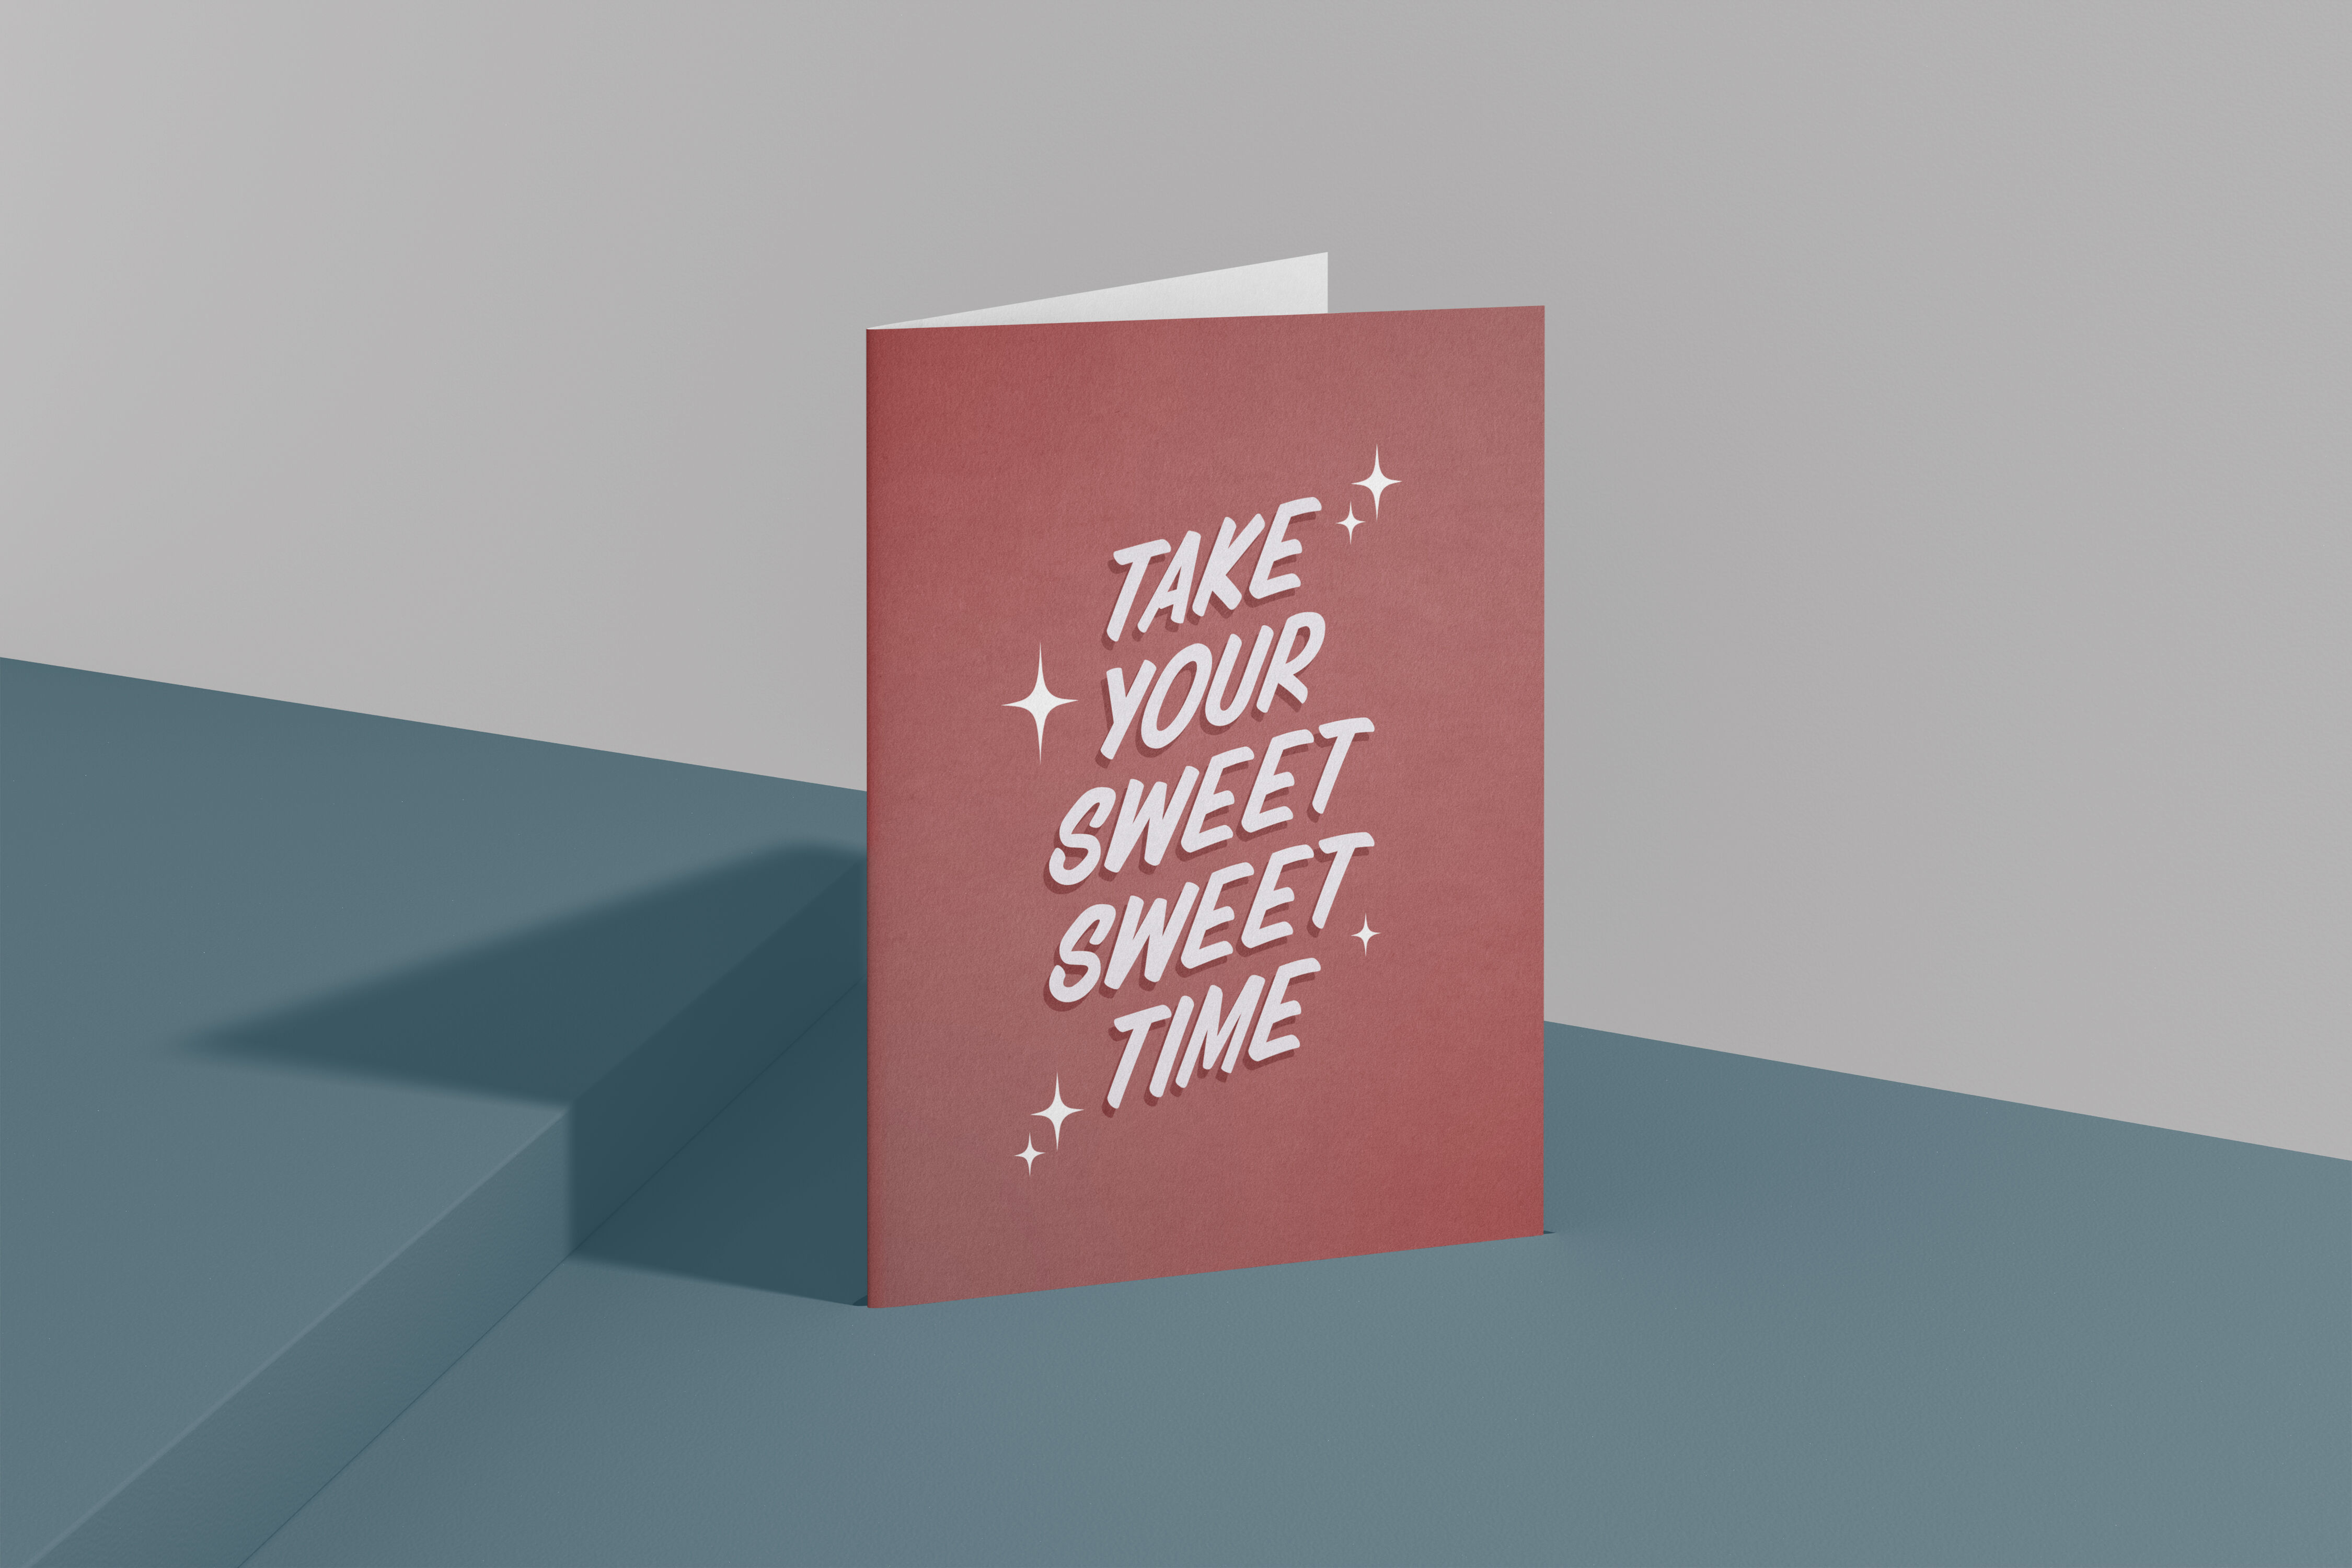 A red greeting card stands on a blue surface, inscribed with "TAKE YOUR SWEET SWEET TIME" in white, sparkly lettering.